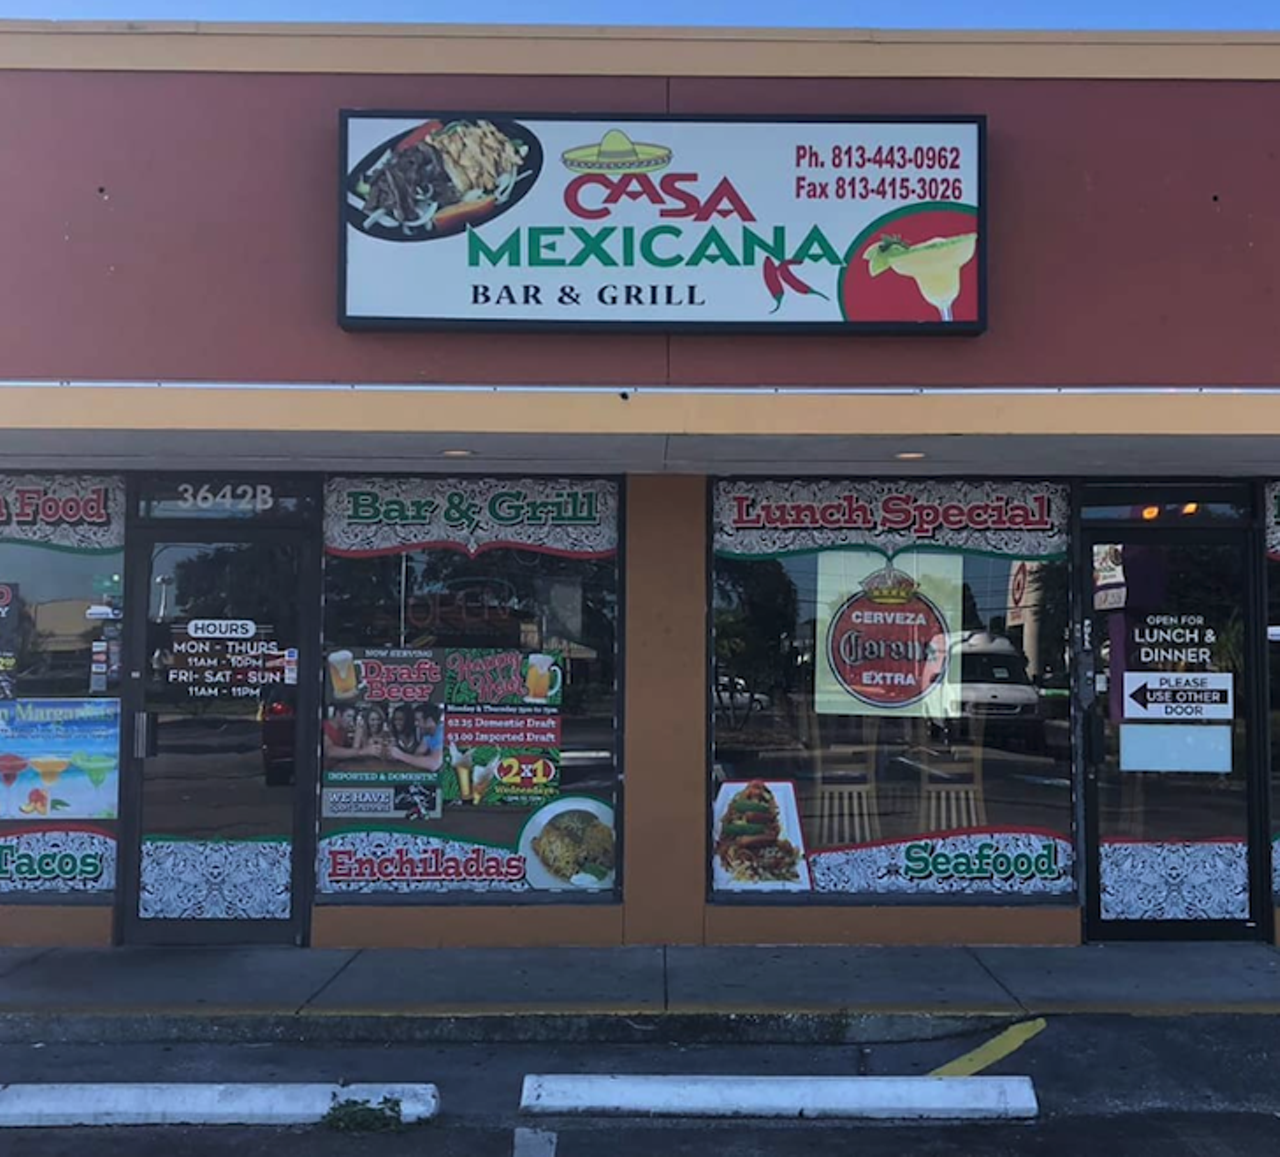 Casa Mexicana Bar & Grill  
3642 W Gandy Blvd Ste B, Tampa,813-405-8205
This restaurant has been serving up authentic Mexican fare for over 28 years, so they must be doing something right. Pop in and try one of their signature tacos. 
Photo via Casa Mexicana Bar & Grill/ Instagram